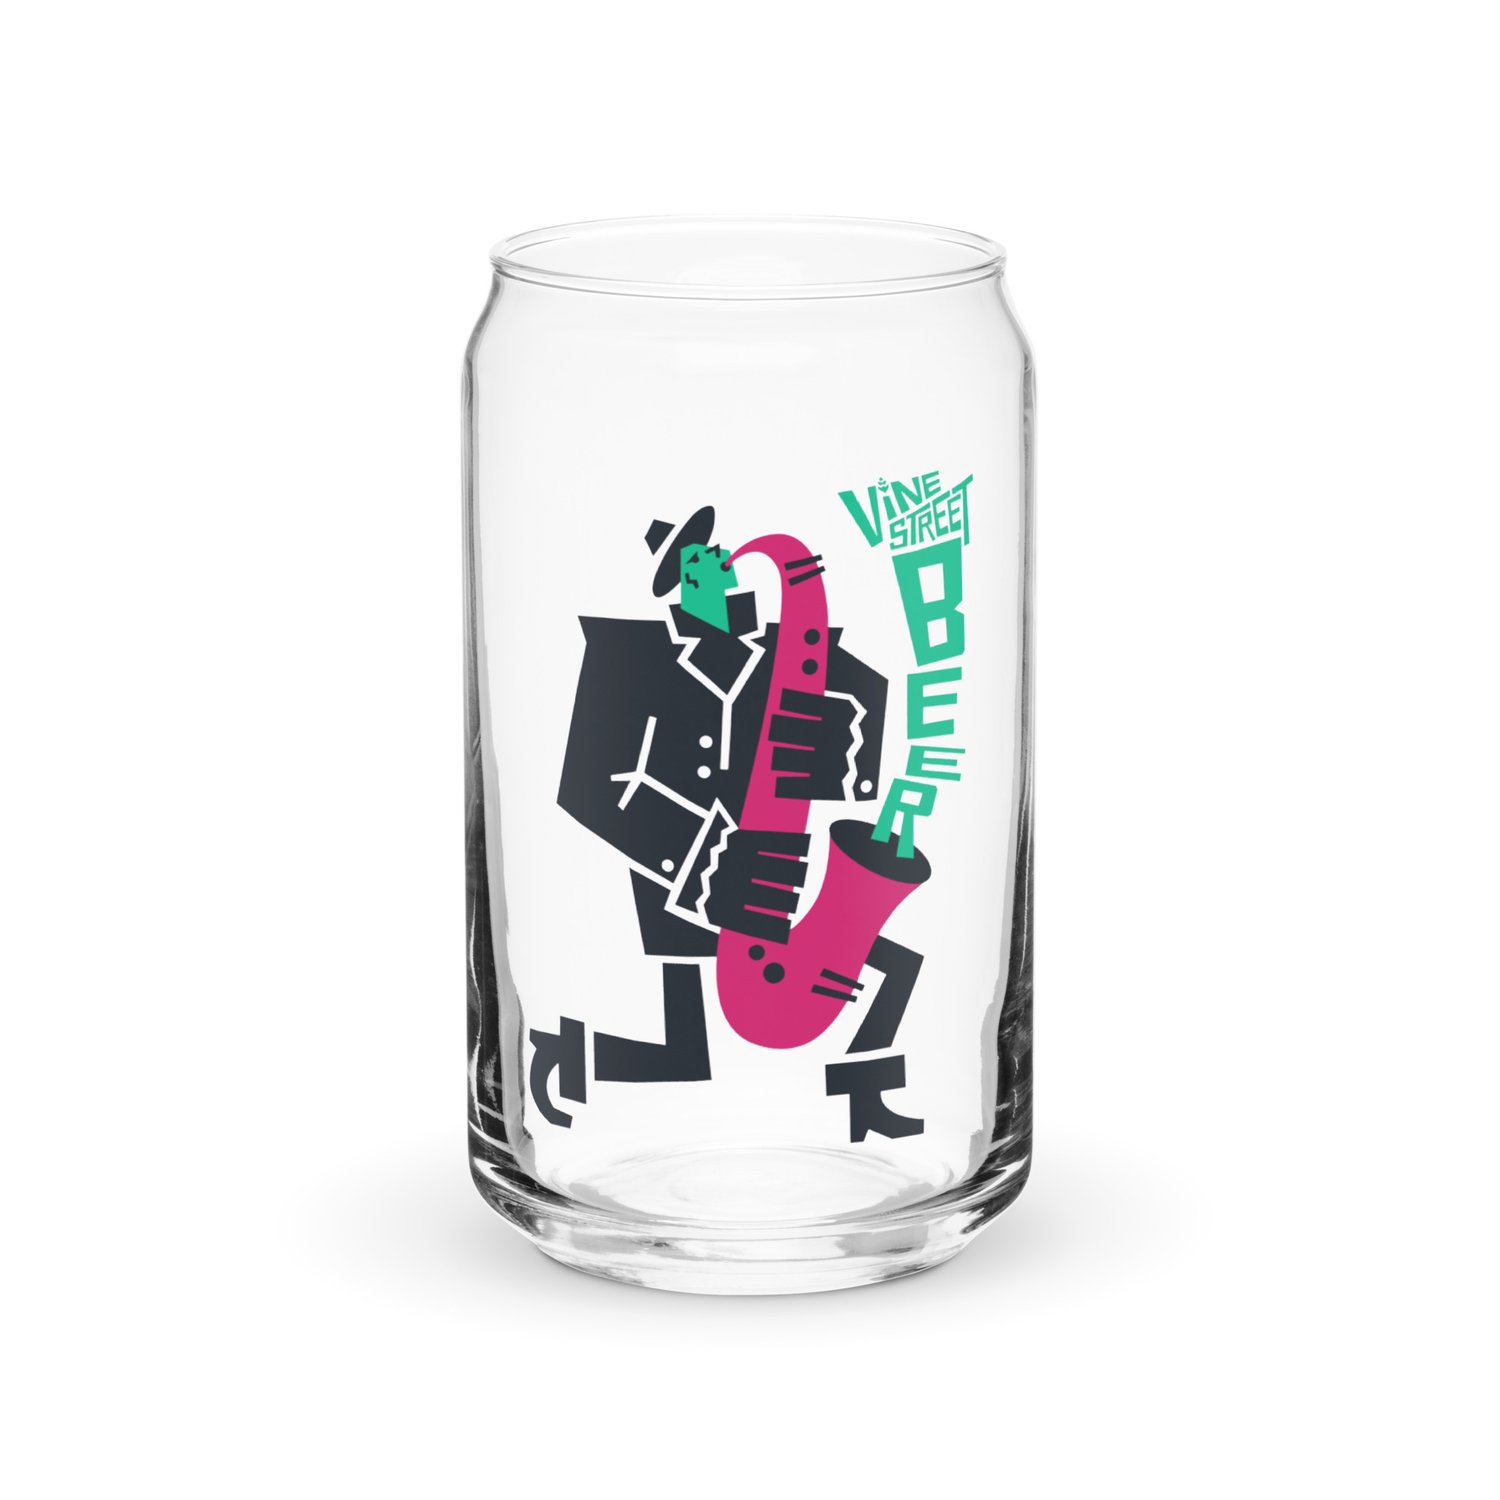 Jazzman can-shaped glass — Vine Street Brewing Co.